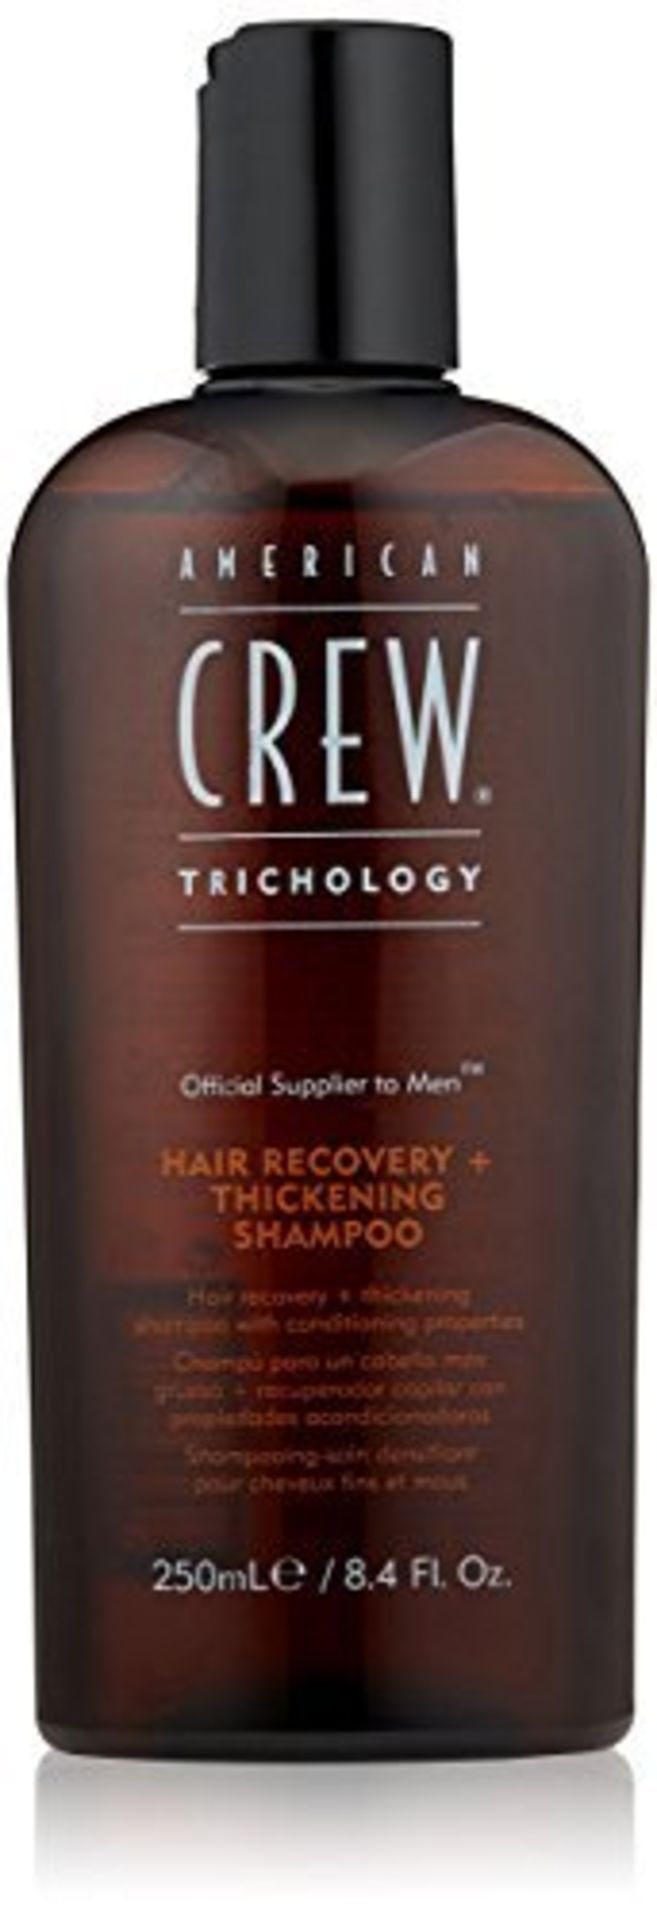 3X NEW American CREW HAIR RECOVERY+ THICKENING shampoo 250ml RRP £60.